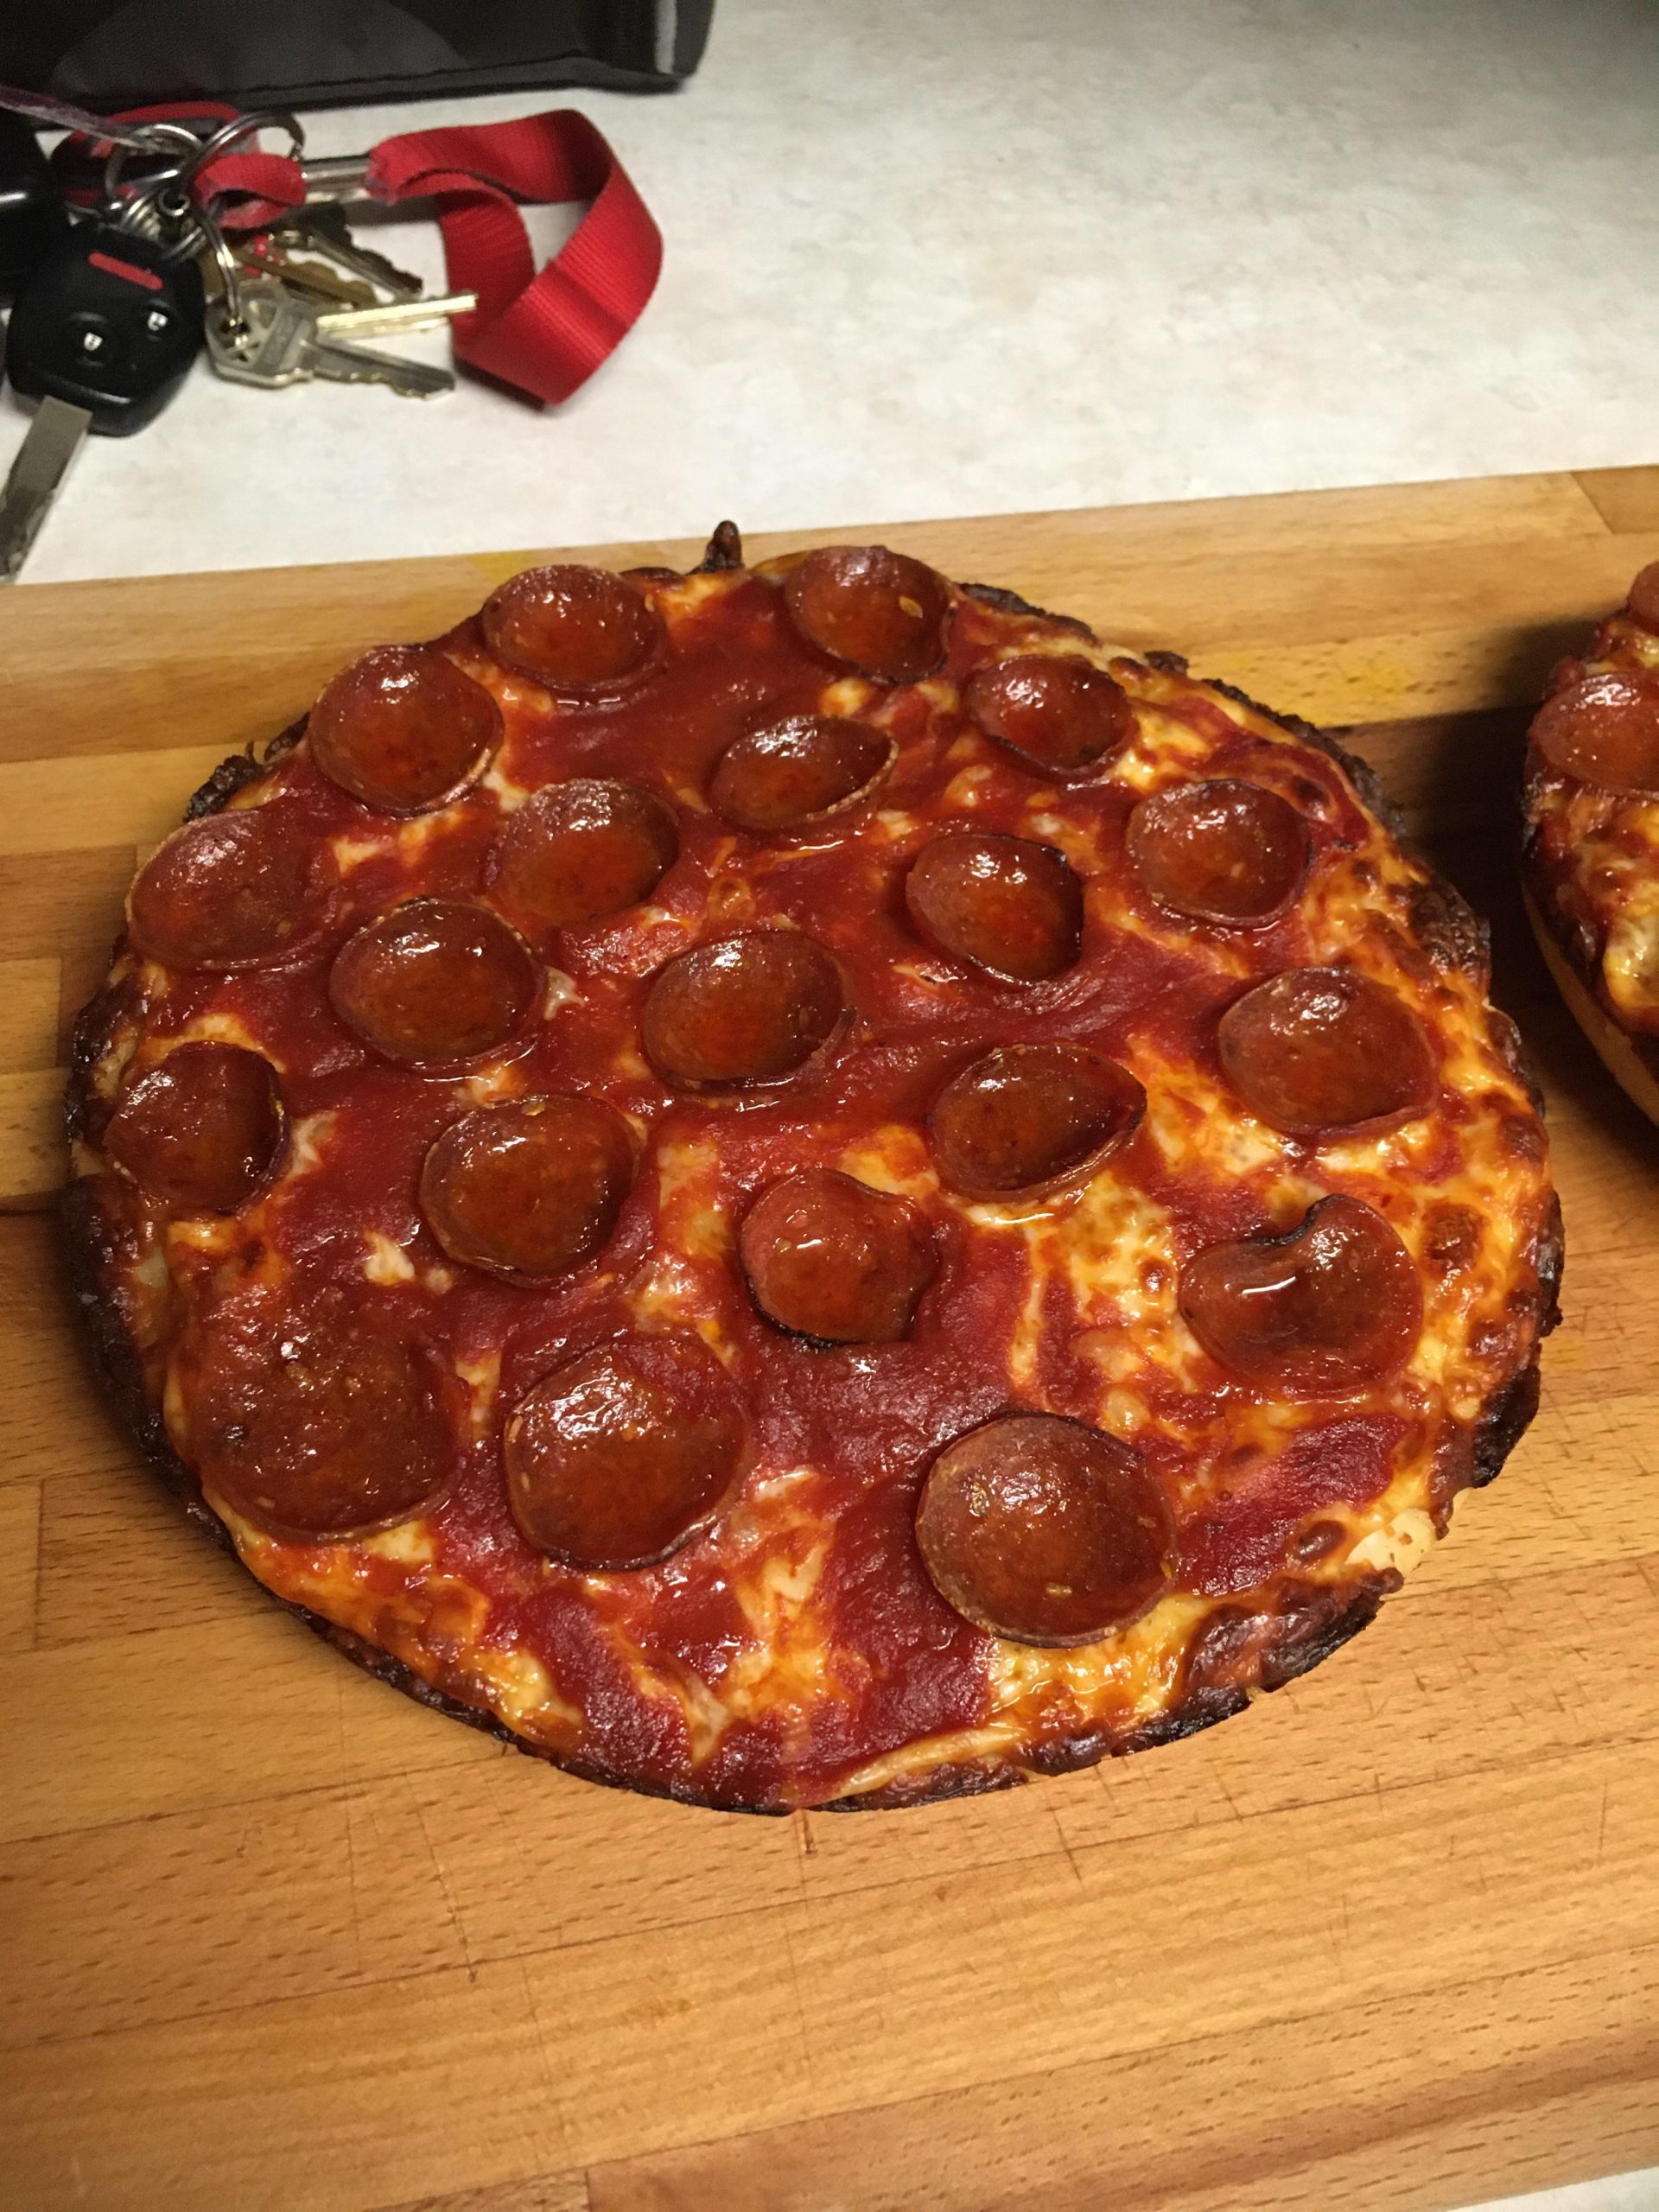 Sauce on top of cheese : Pizza